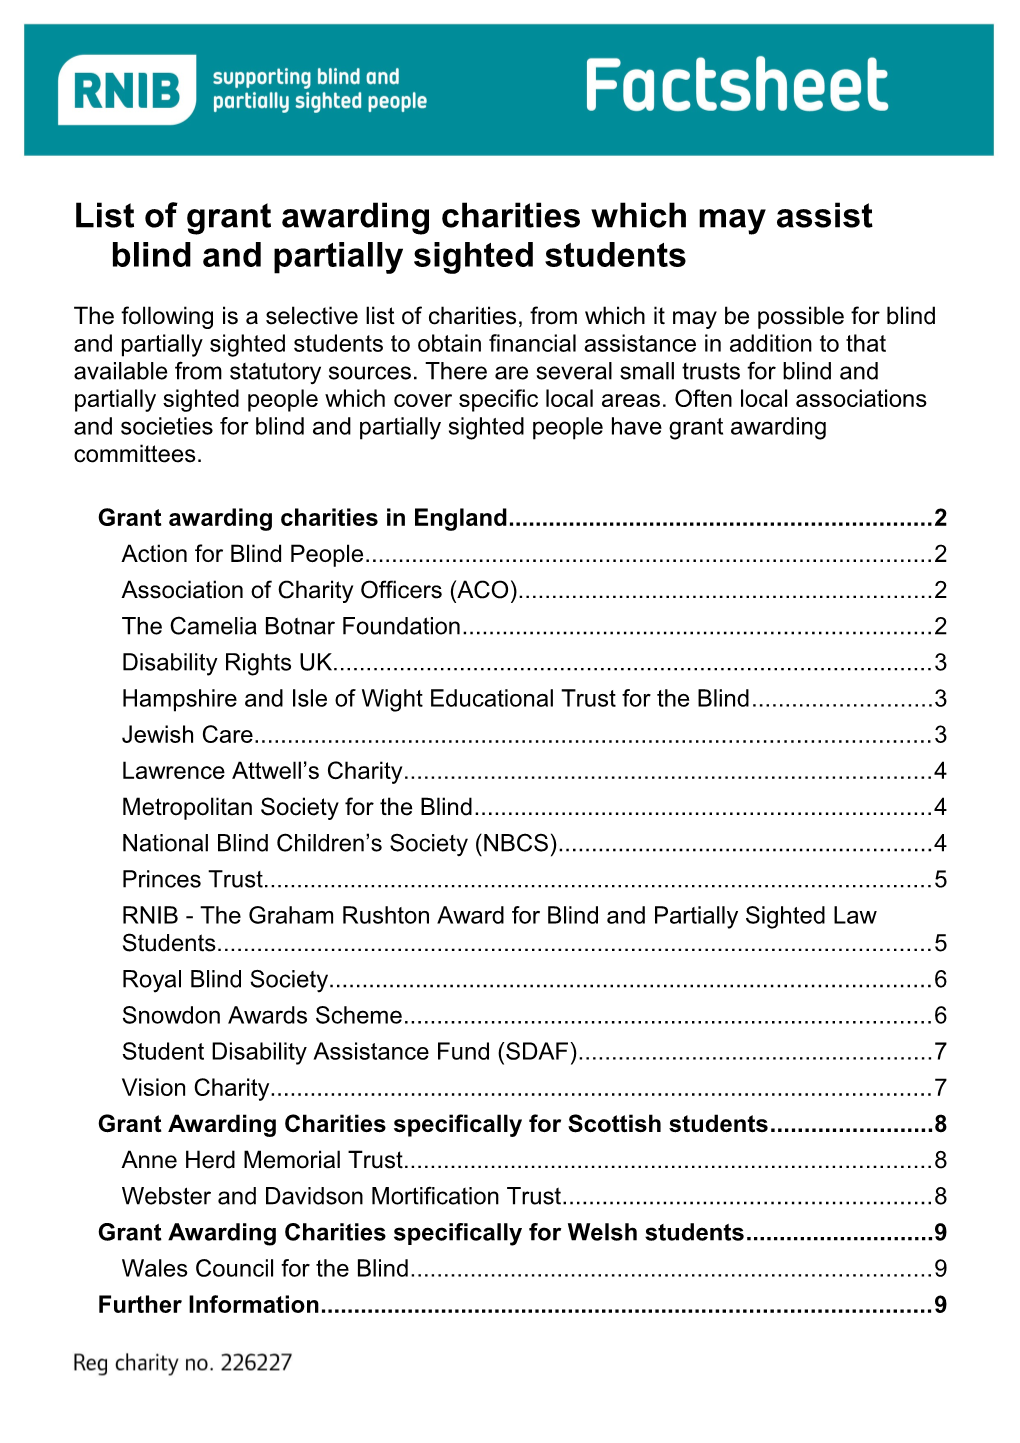 Grants for Blind and Partially Sighted Students